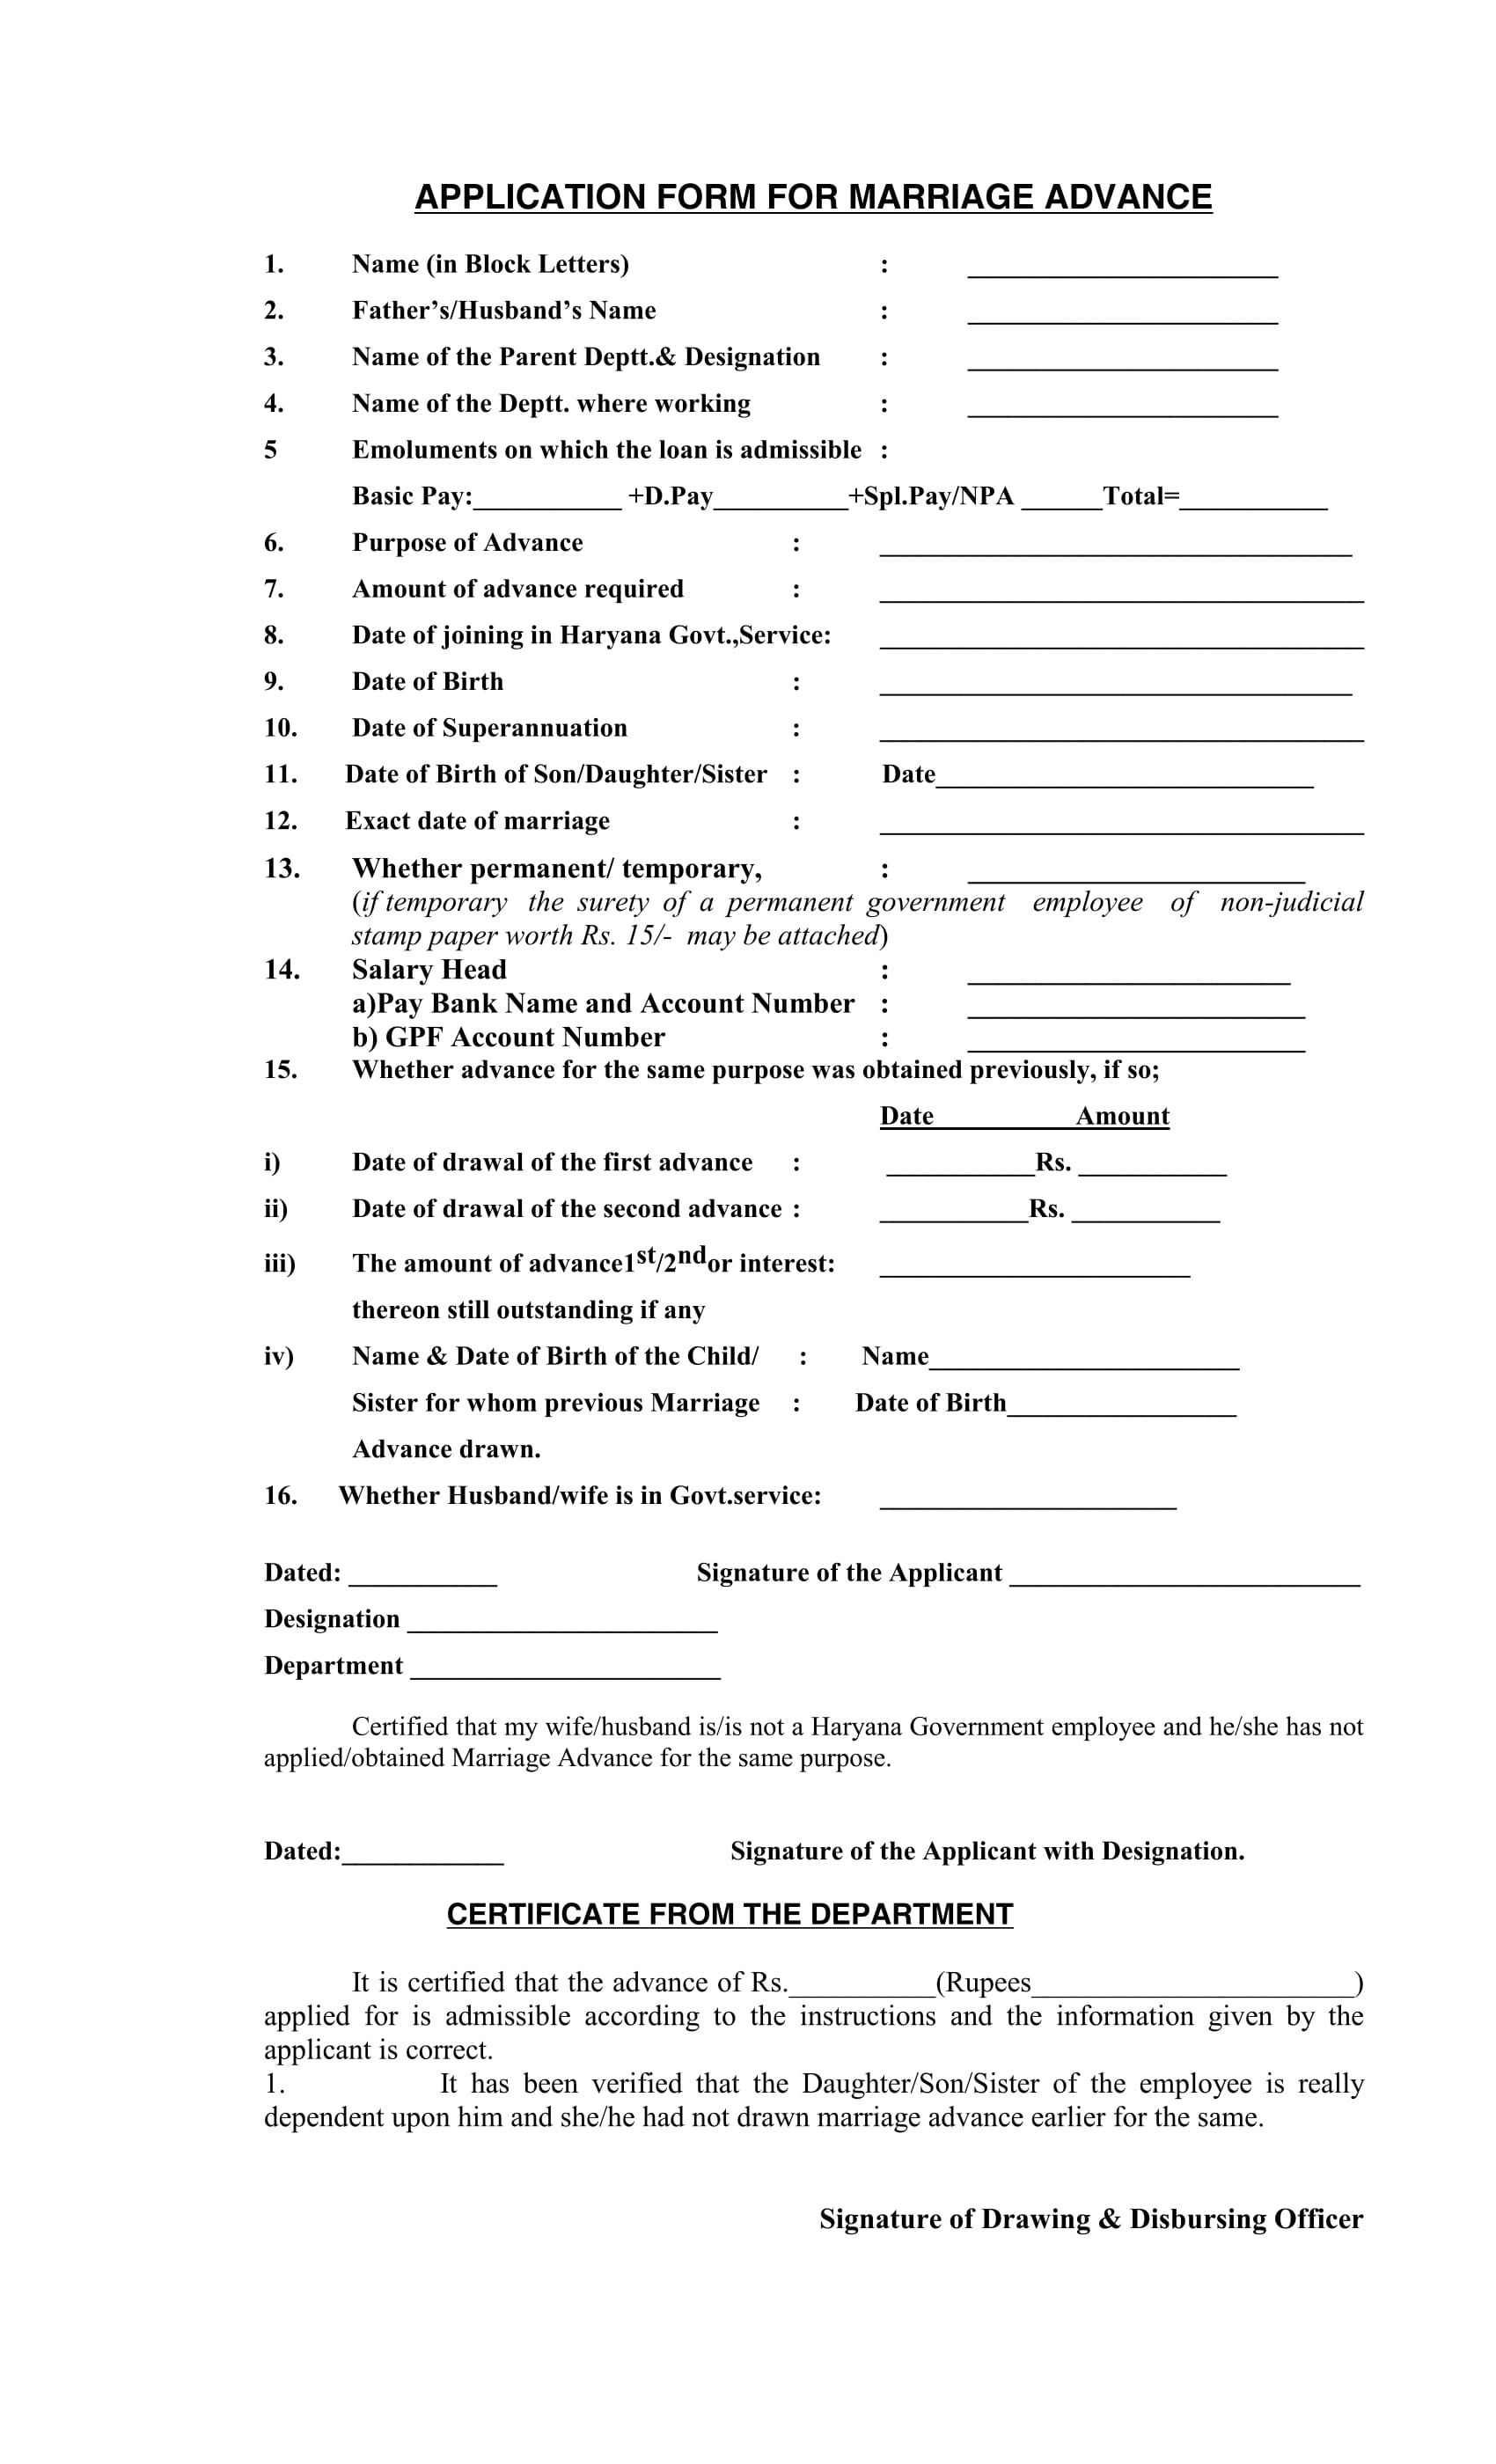 FREE 10+ Varieties of Marriage Application Forms in PDF ...